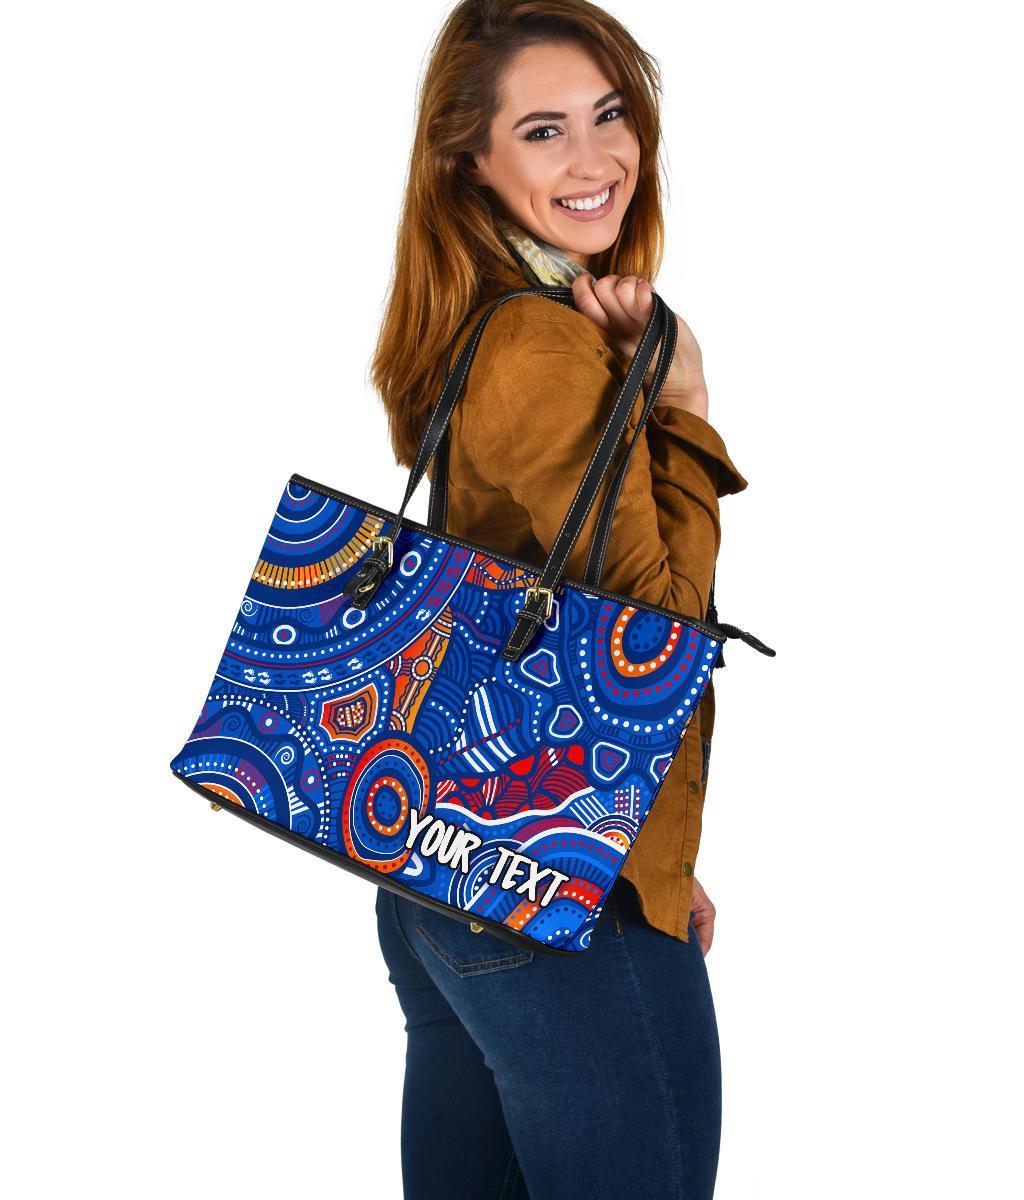 custom-text-aboriginal-large-leather-tote-bag-indigenous-footprint-patterns-blue-color